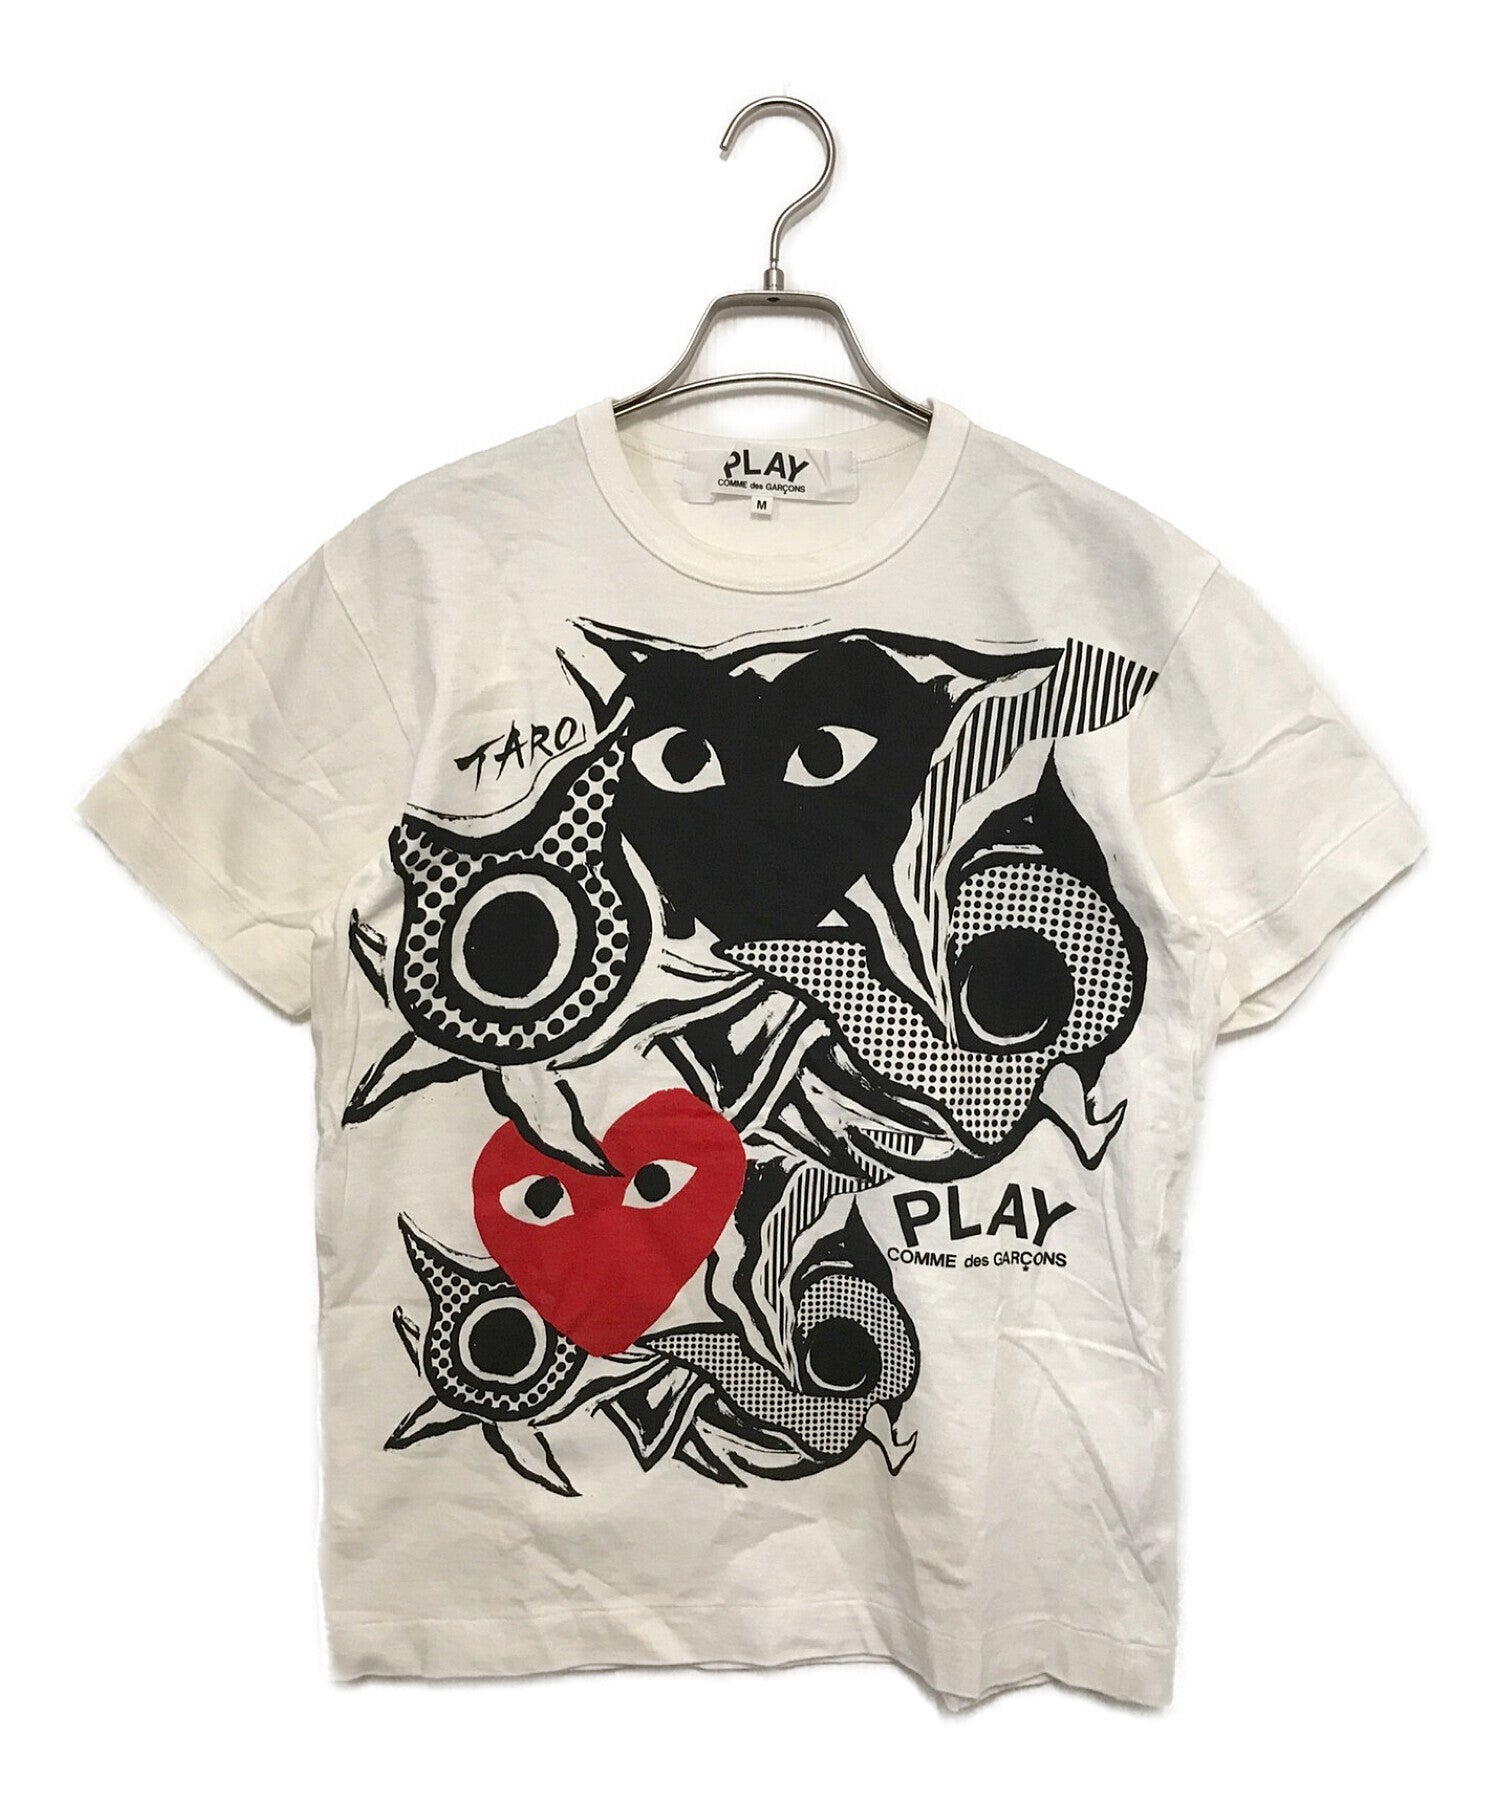 Archive Factory Play Comme des Garcons Printed T-Shirt 川久保 玲